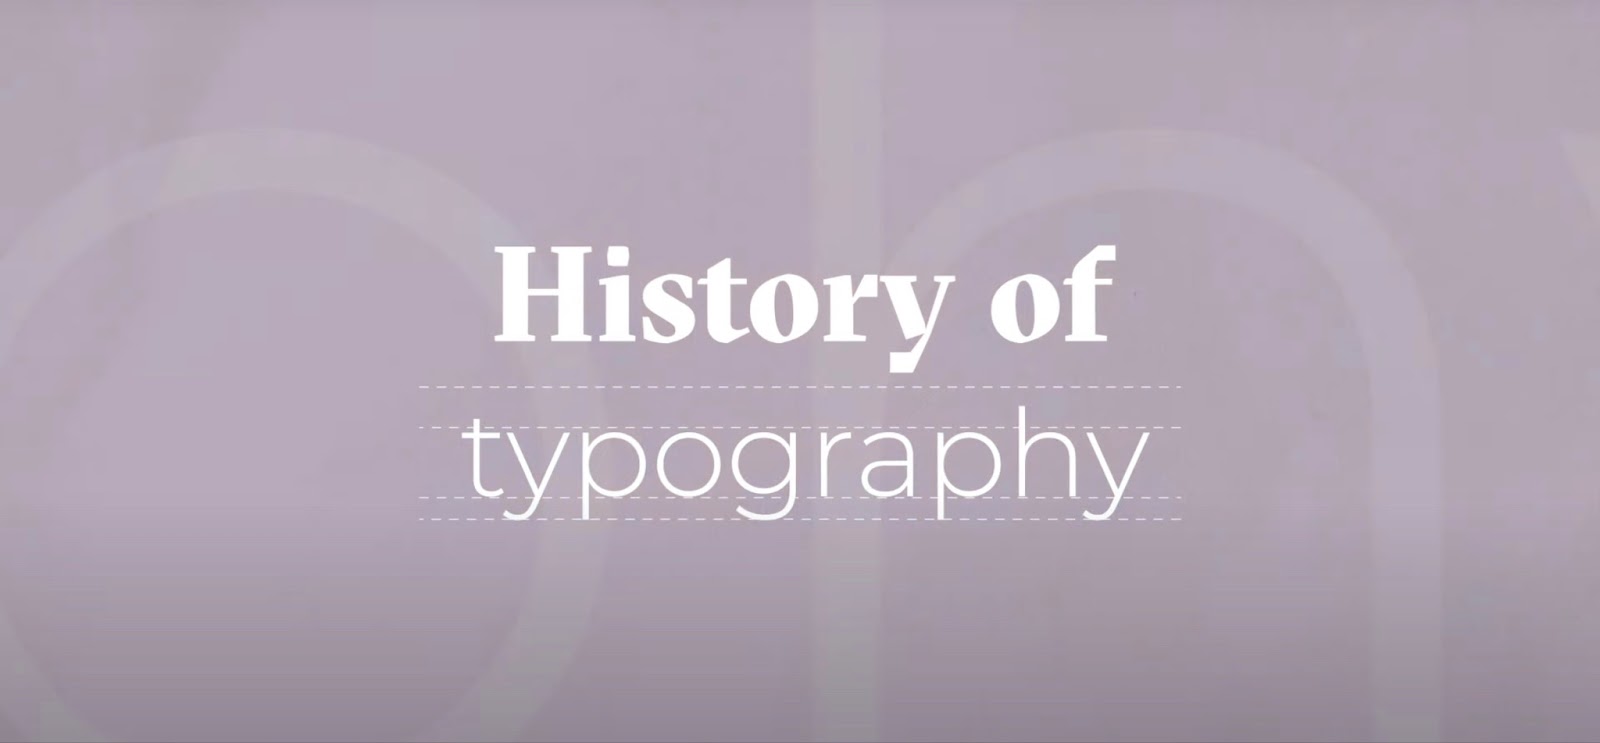 The inscription "History of typography" on a pink background